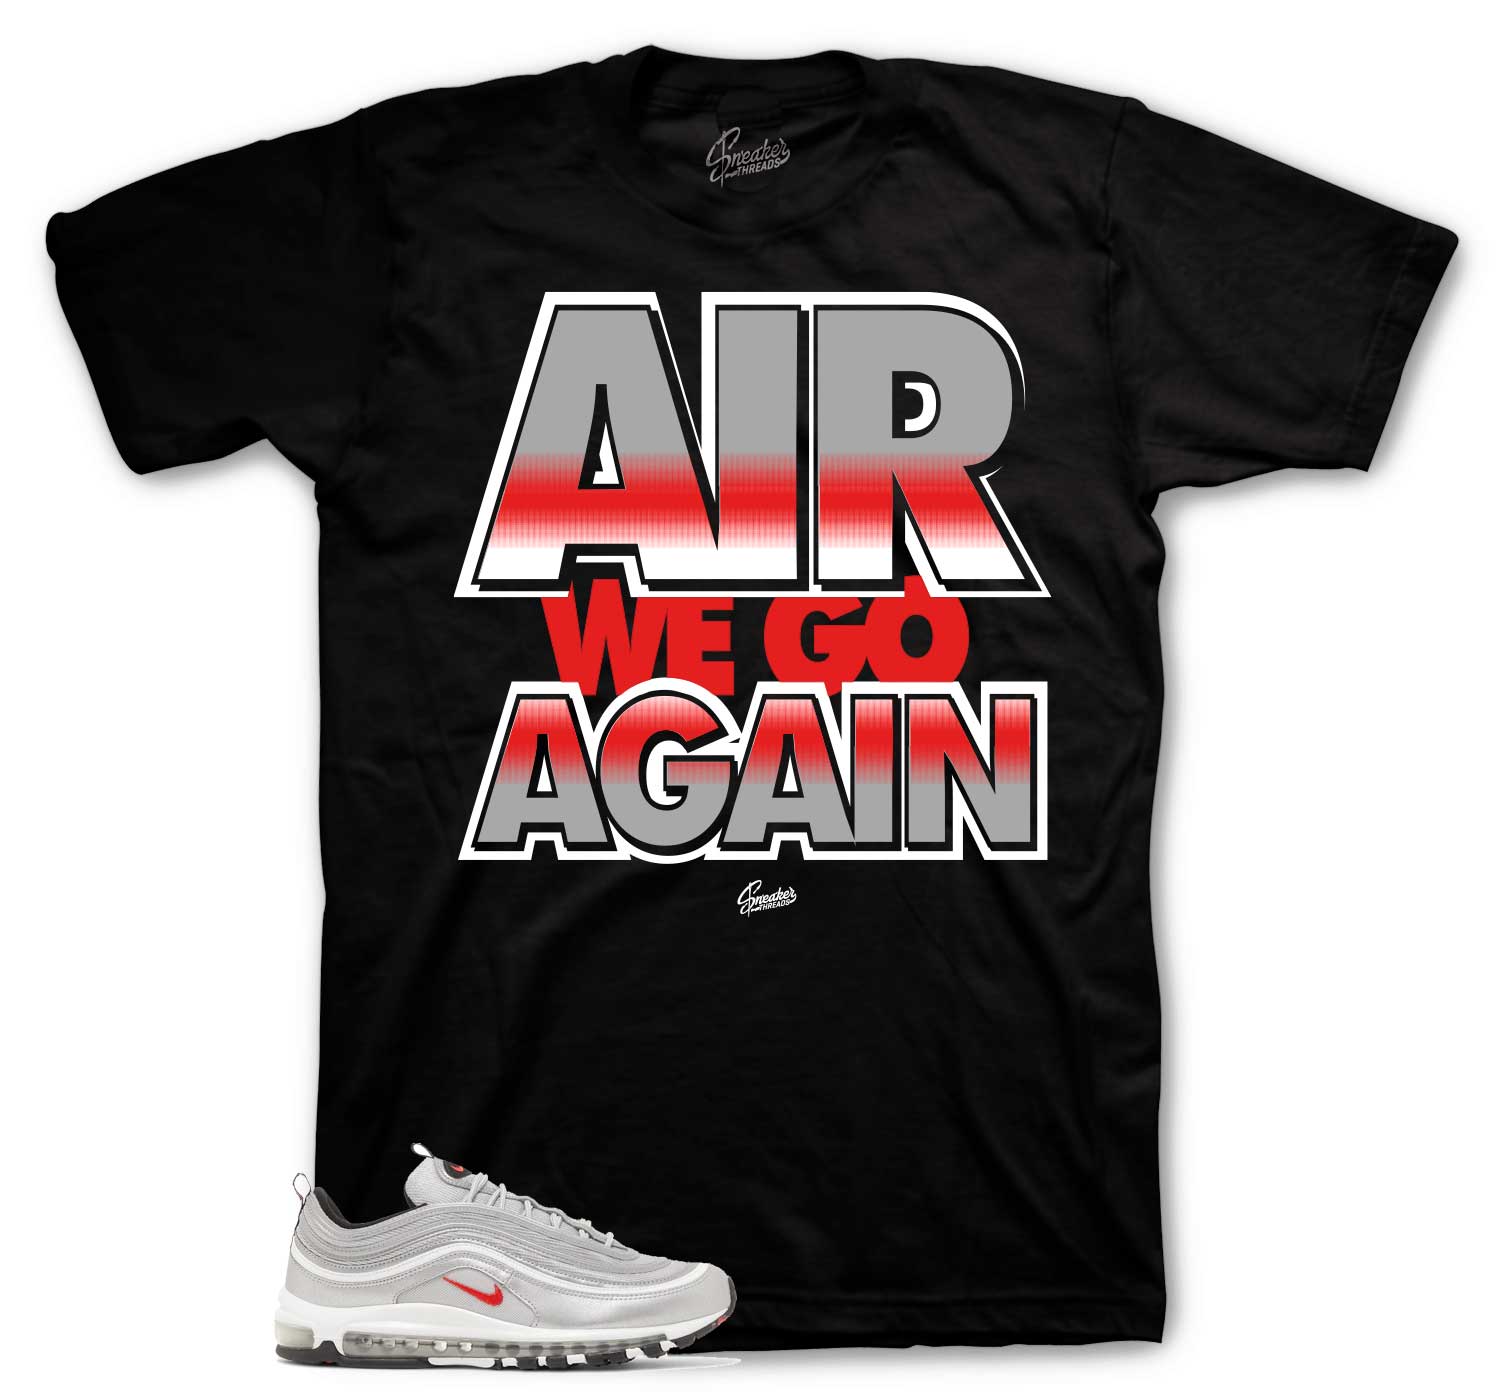 Respectvol Mortal gerucht Air Max 97 Silver Bullet Sneaker Tees And Outfits | air we go Design